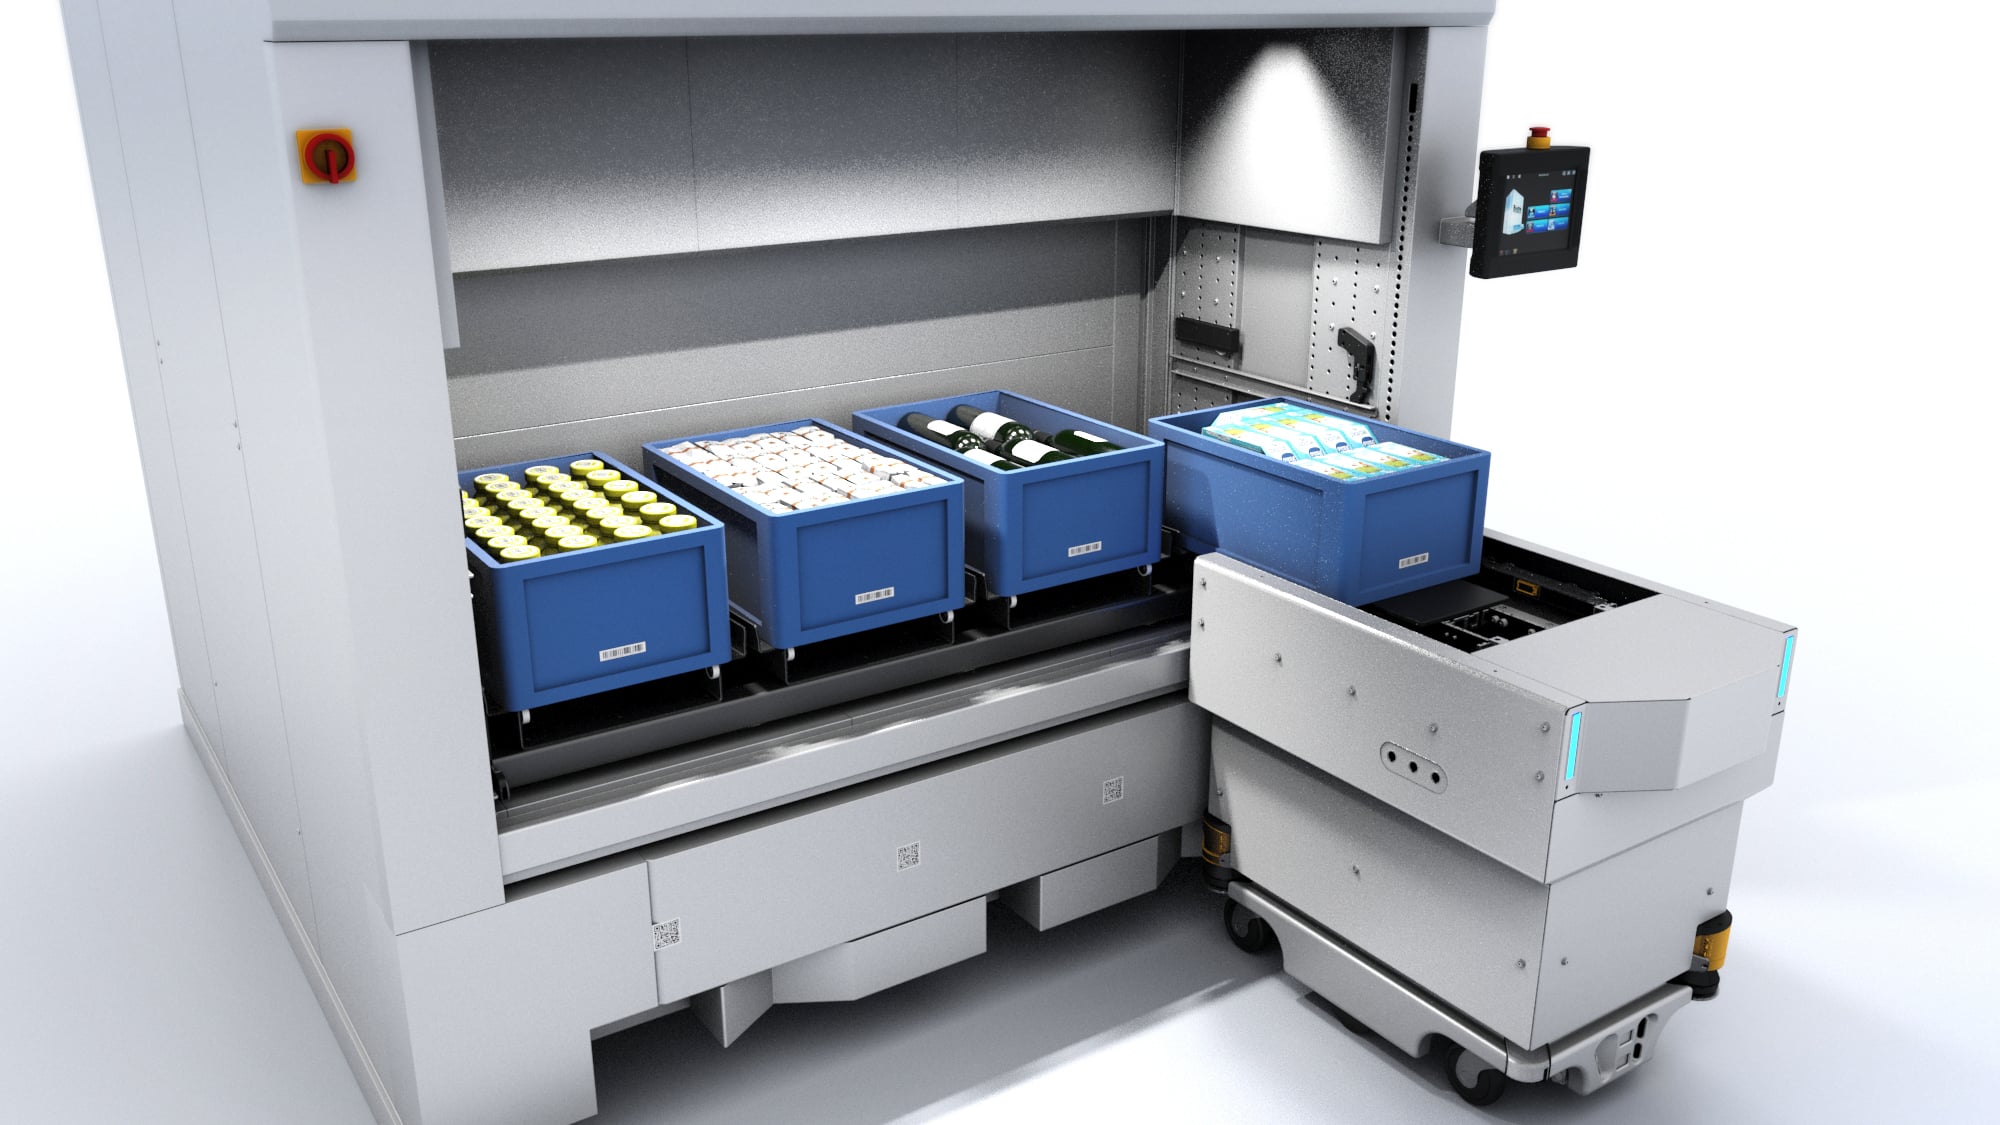 Modula Integration with Autonomous Mobile Robots (AMRs): Fully Automated Case Picking